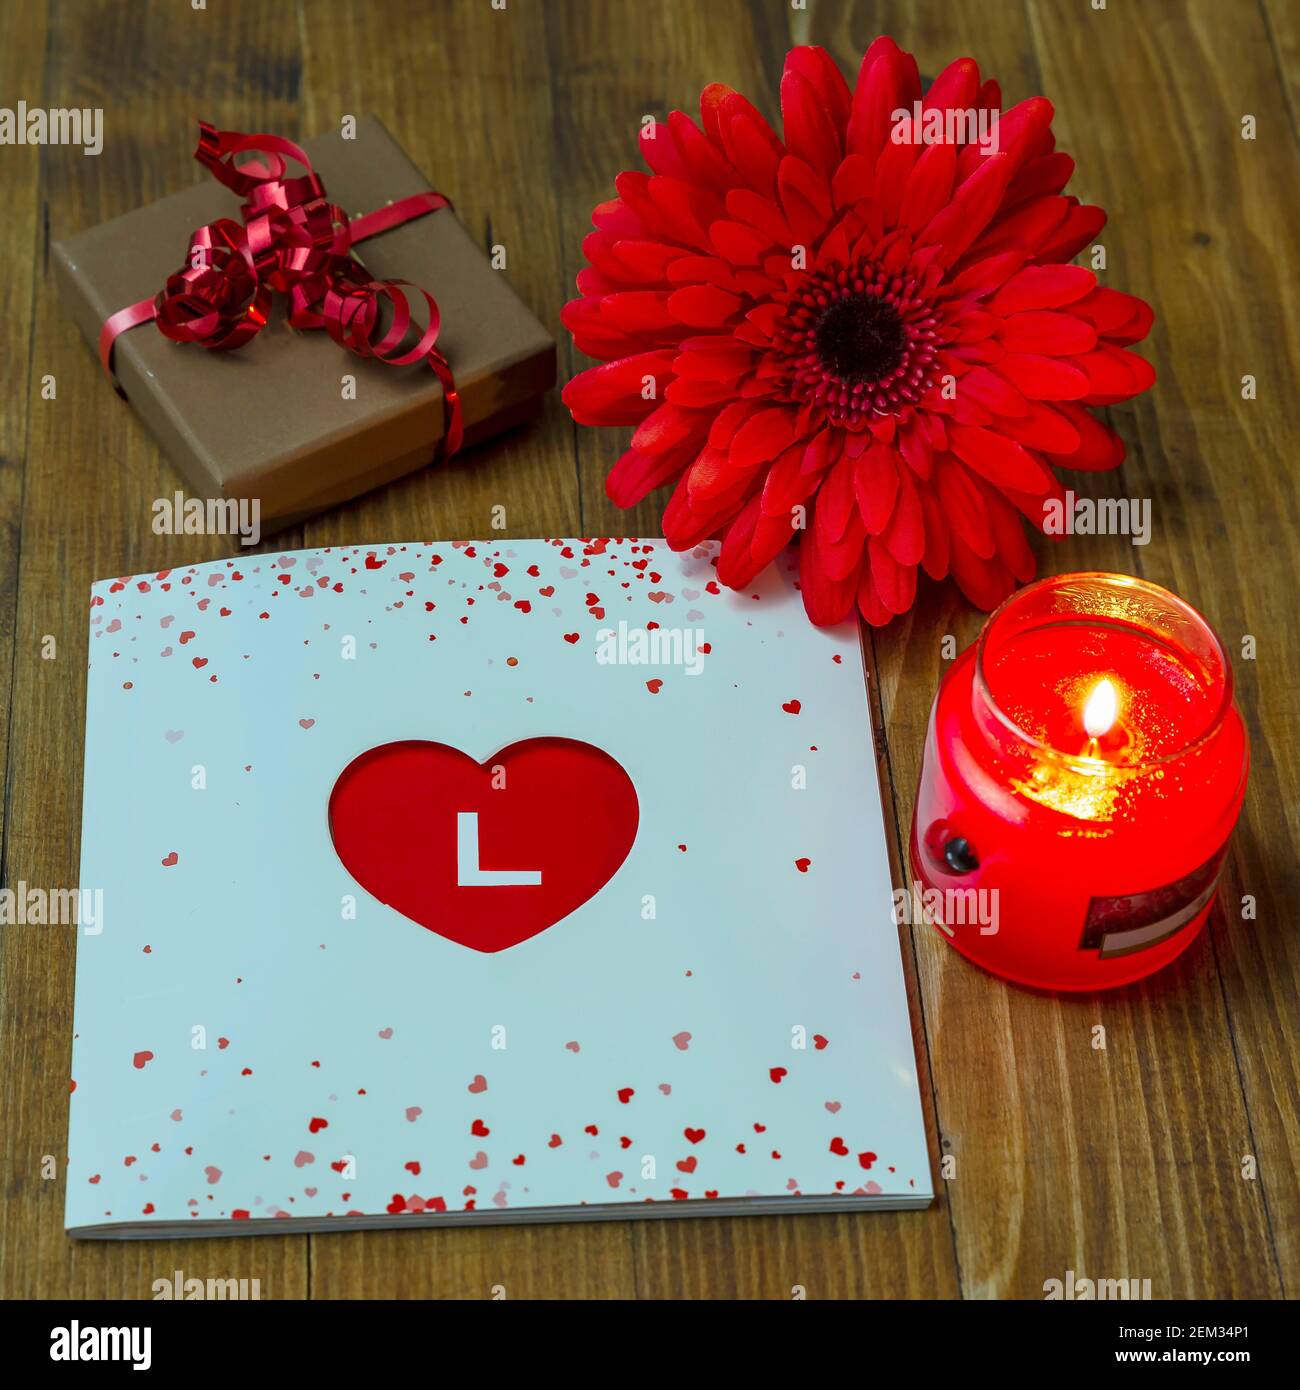 Composition with gift box and book with heart-shaped cover and letter L highlighted on red background and red flower Stock Photo